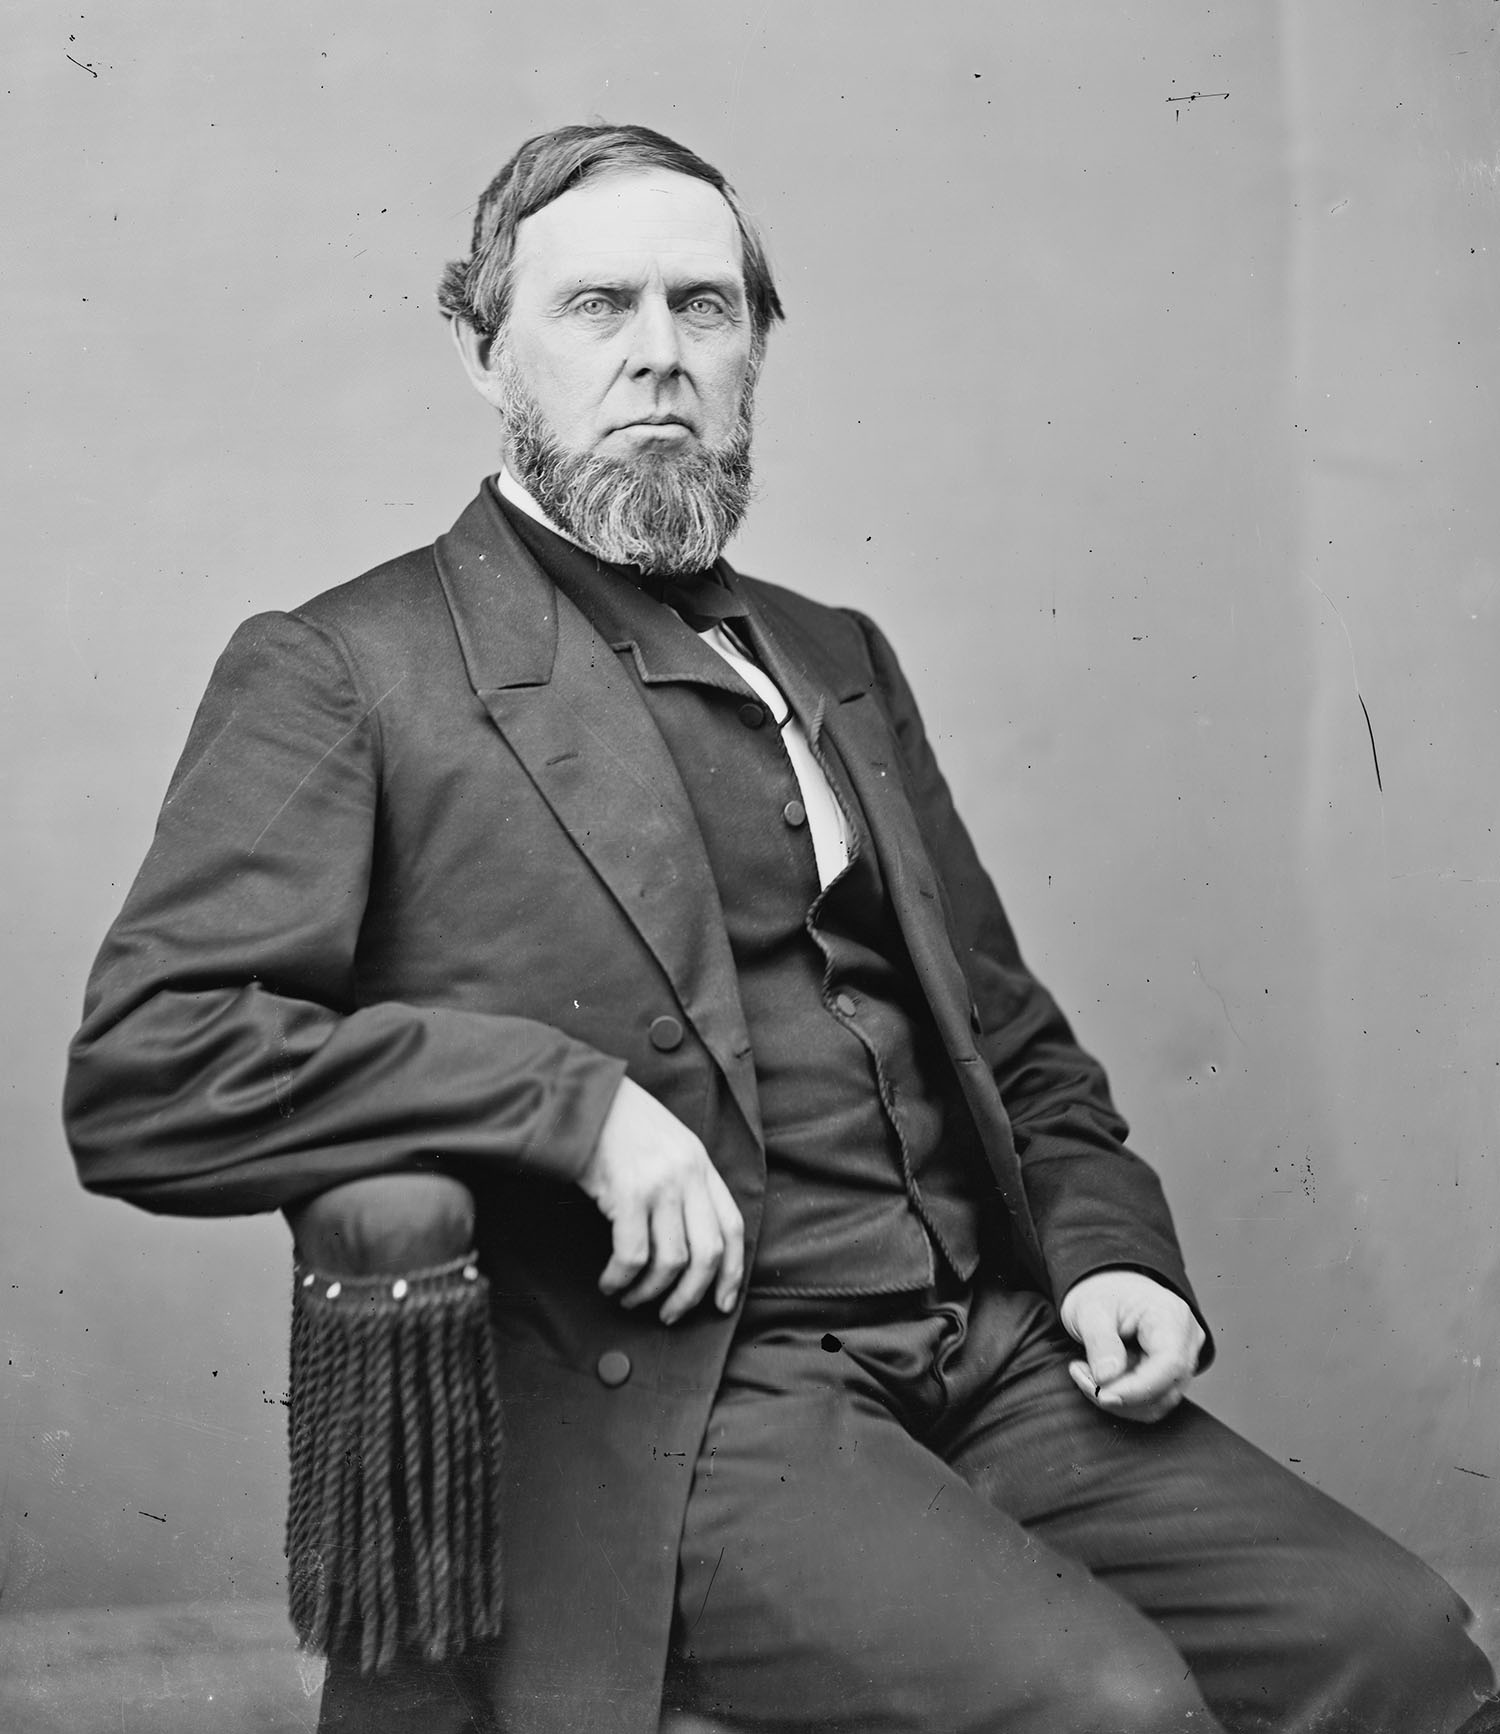 James Harlan, photo in public domain, Library of Congress